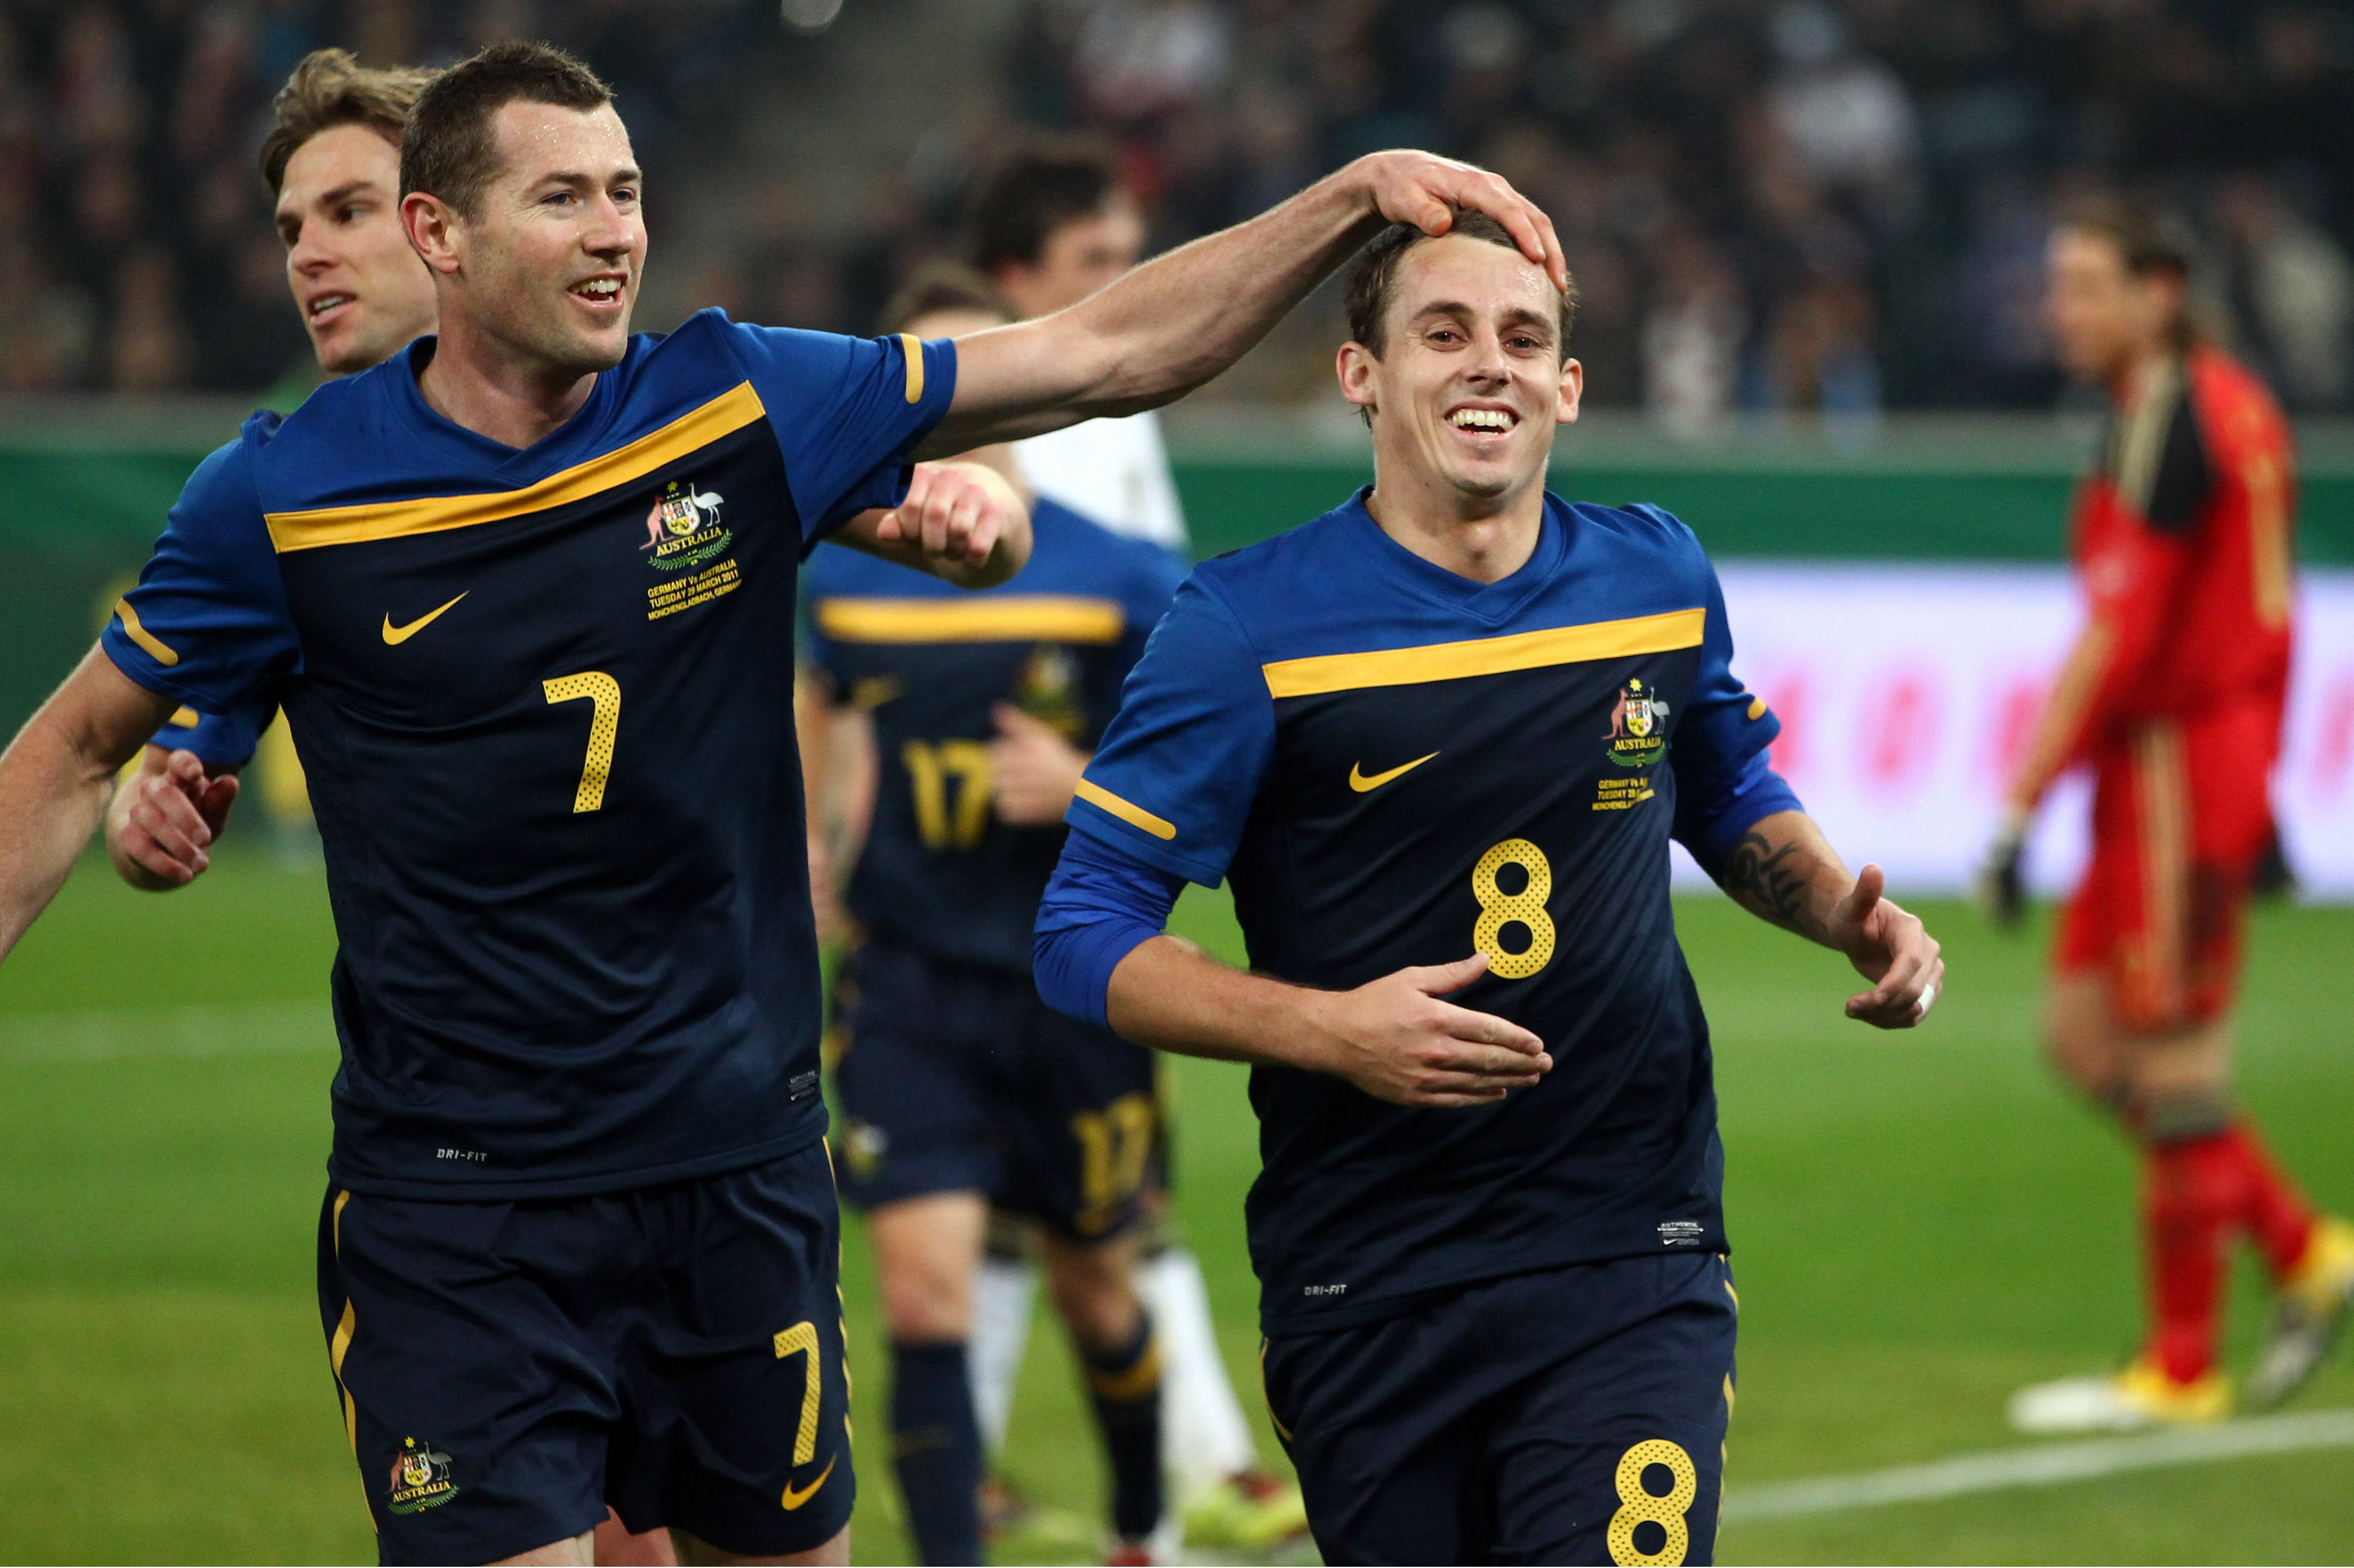 Australia’s best FIFA ranking from the last 10 years was 19 in March 2010, the same month we beat Germany 2-1 on their own turf